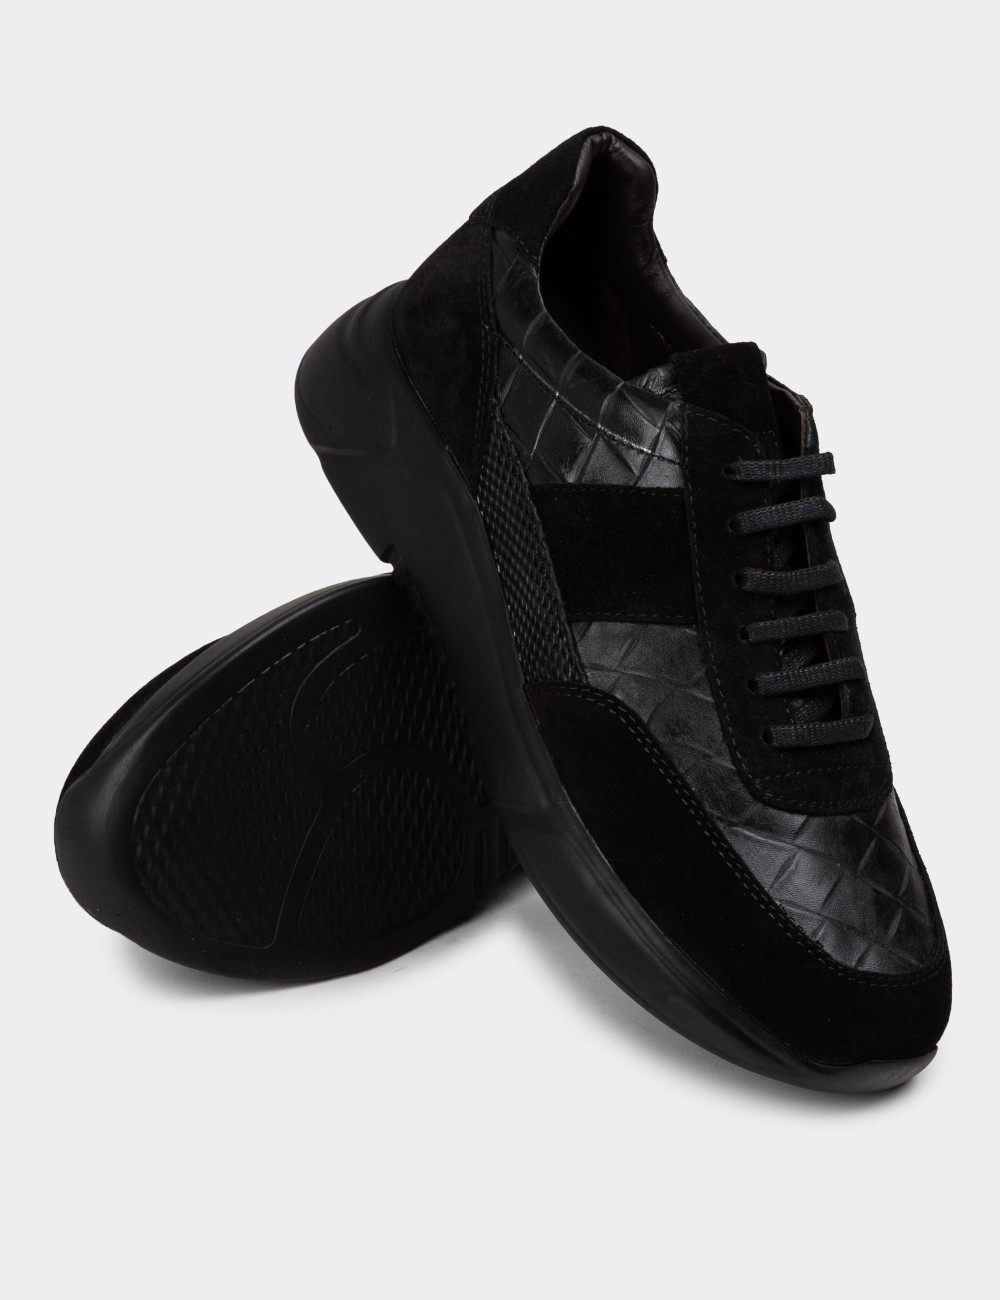 Black Suede Leather Sneakers - 01963MSYHE08